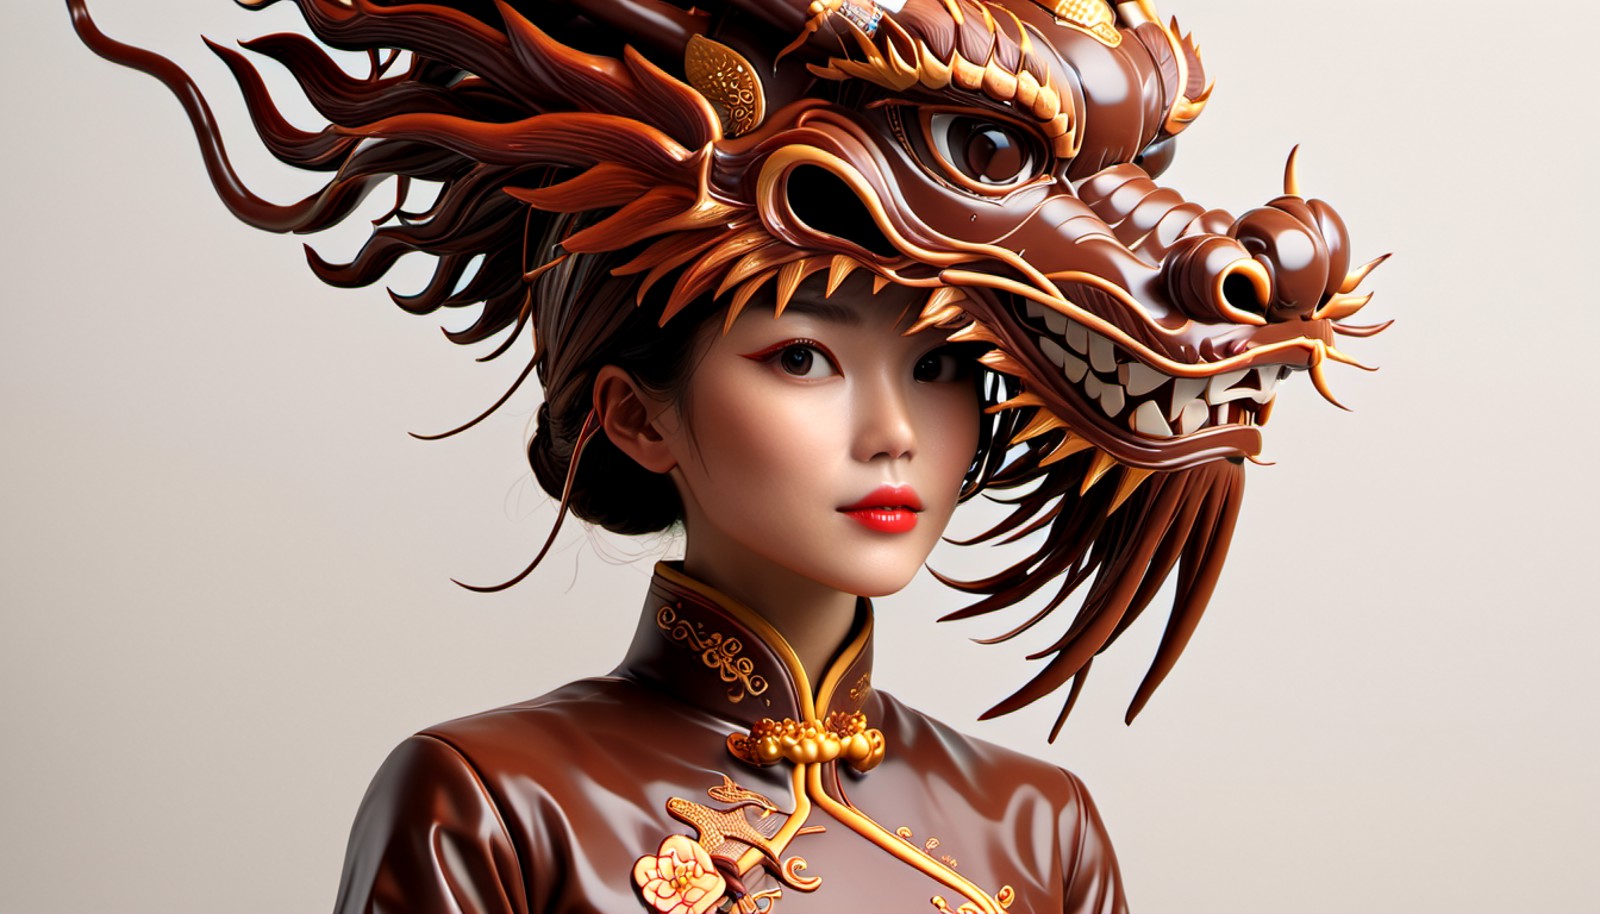 ChocolateRay, woman made entirely of chocolate, wearing traditional chinese garb and a Dragon Mask